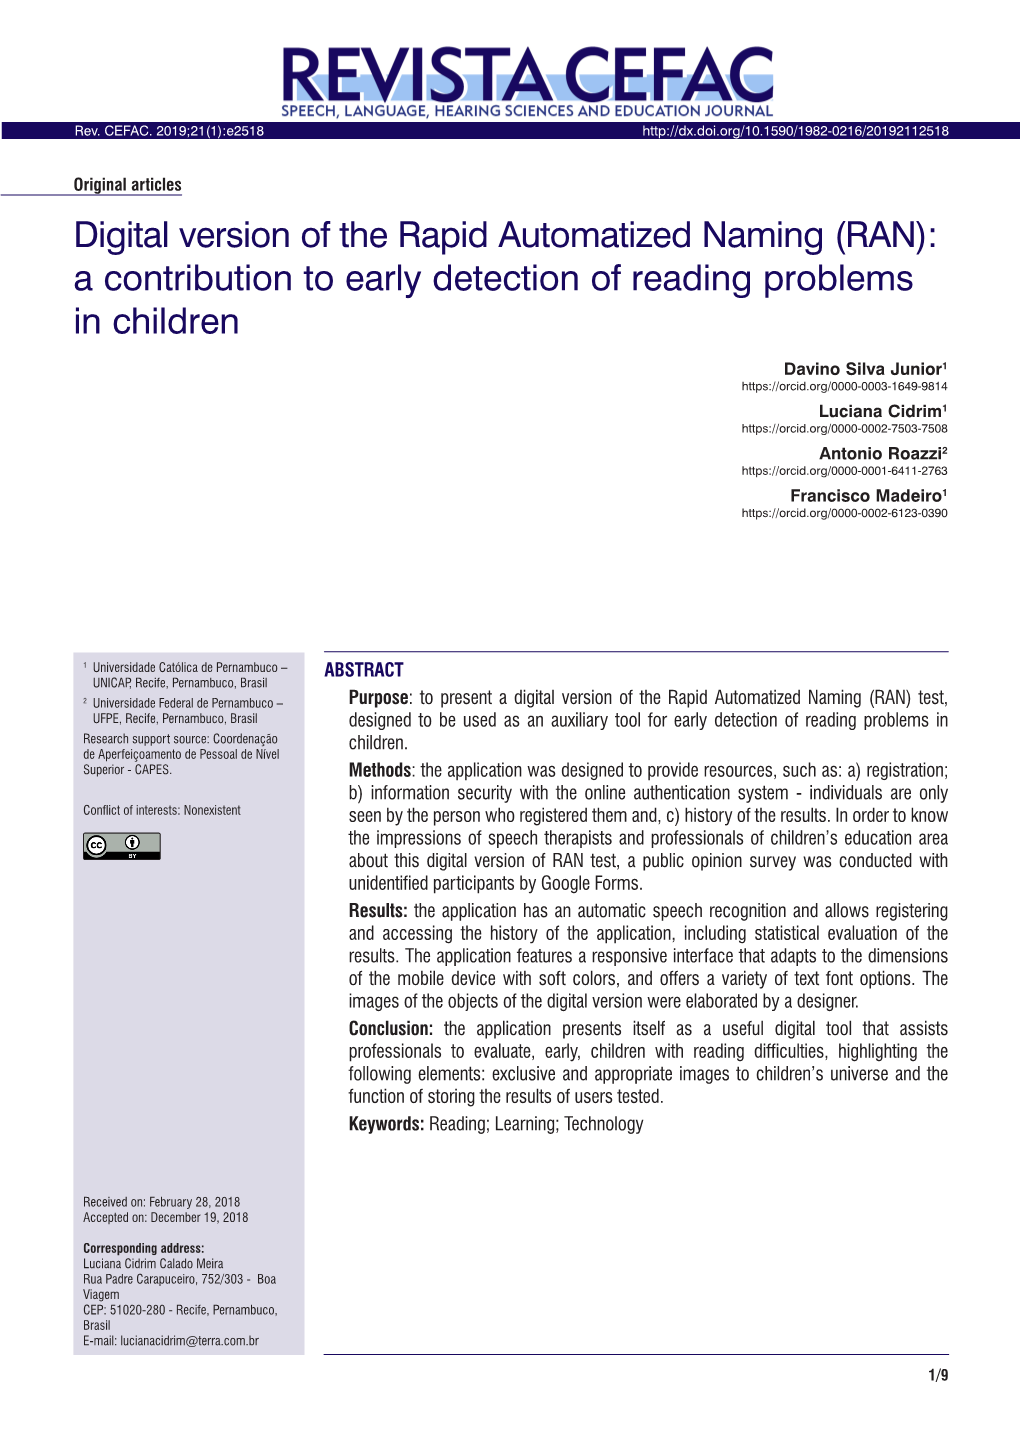 Digital Version of the Rapid Automatized Naming (RAN): a Contribution to Early Detection of Reading Problems in Children